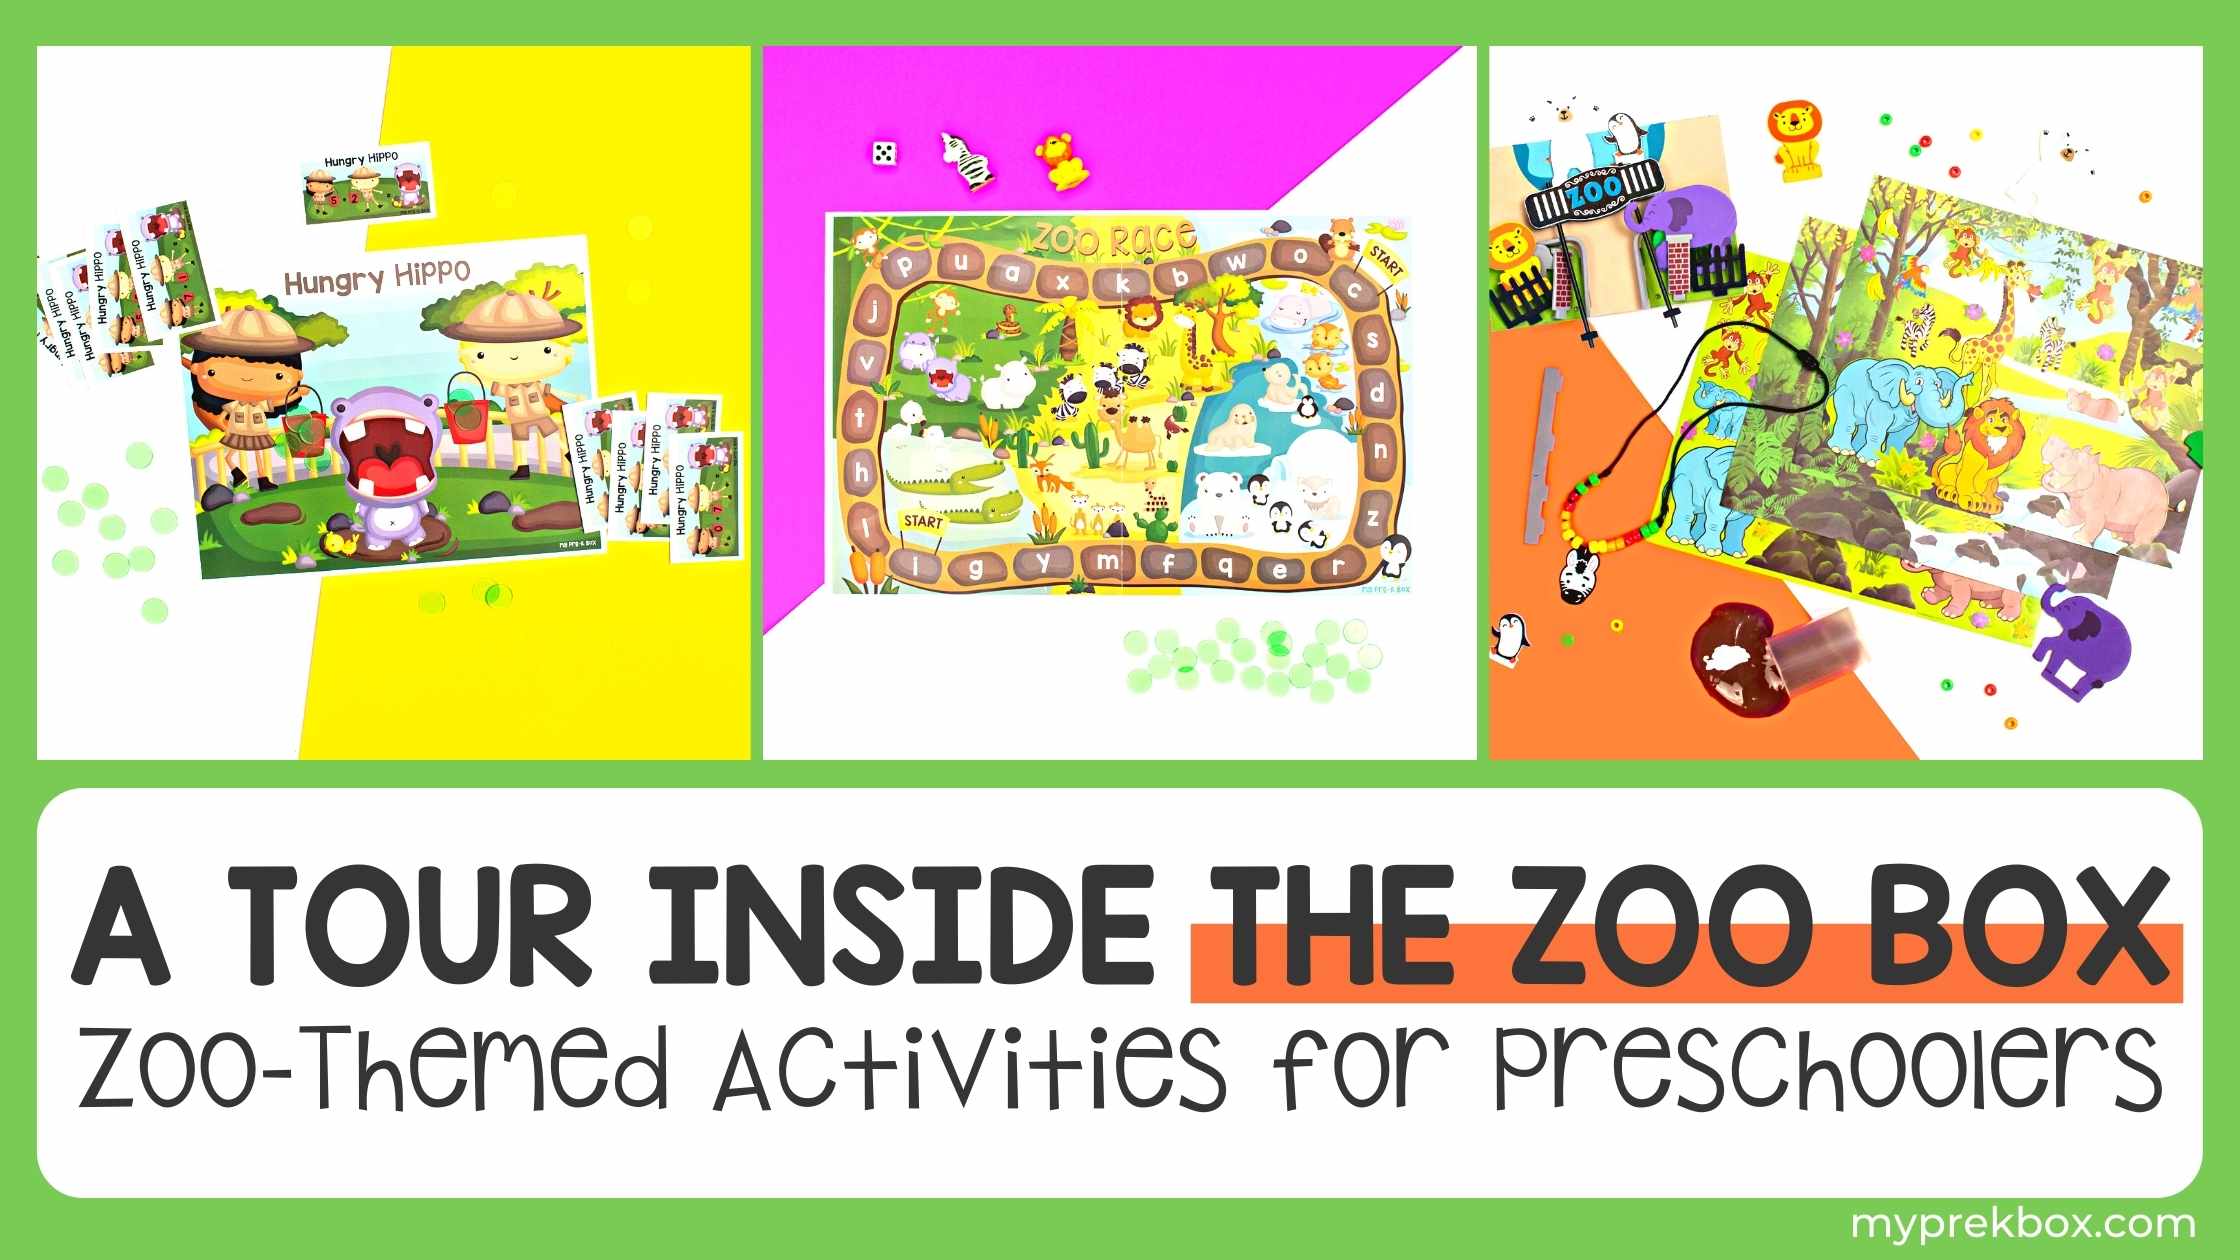 An Exciting Tour Inside The Zoo Box